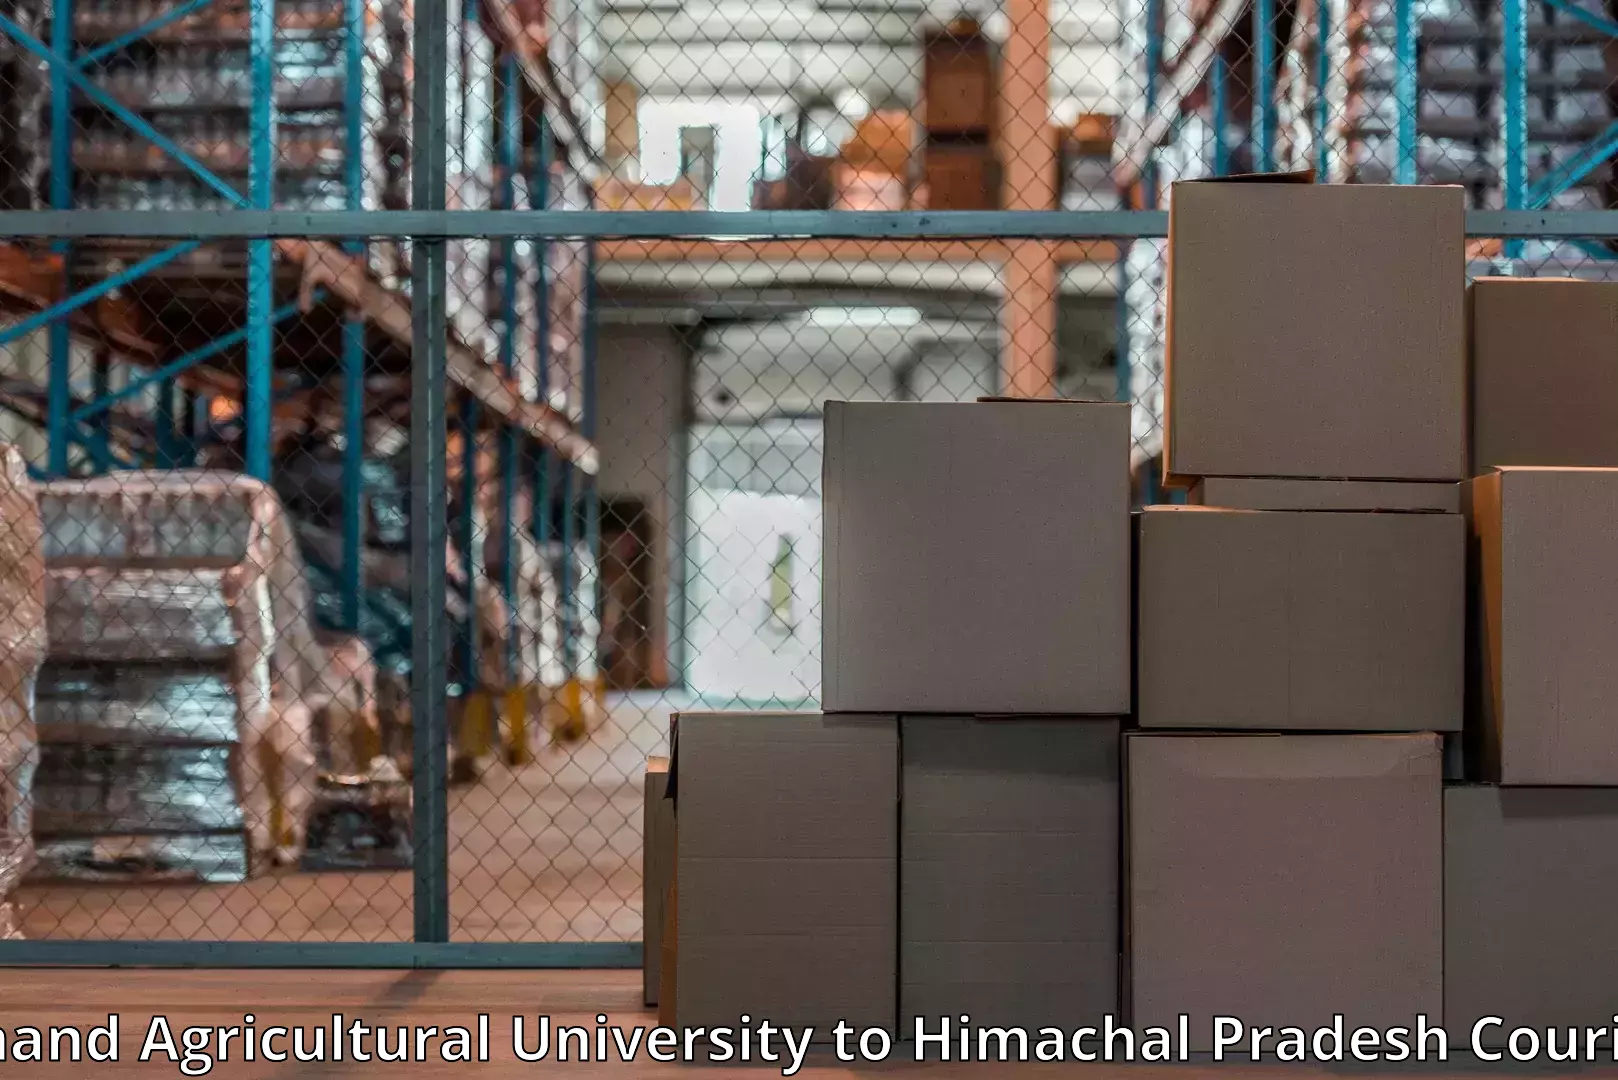 Quality furniture shipping Anand Agricultural University to YS Parmar University of Horticulture and Forestry Solan